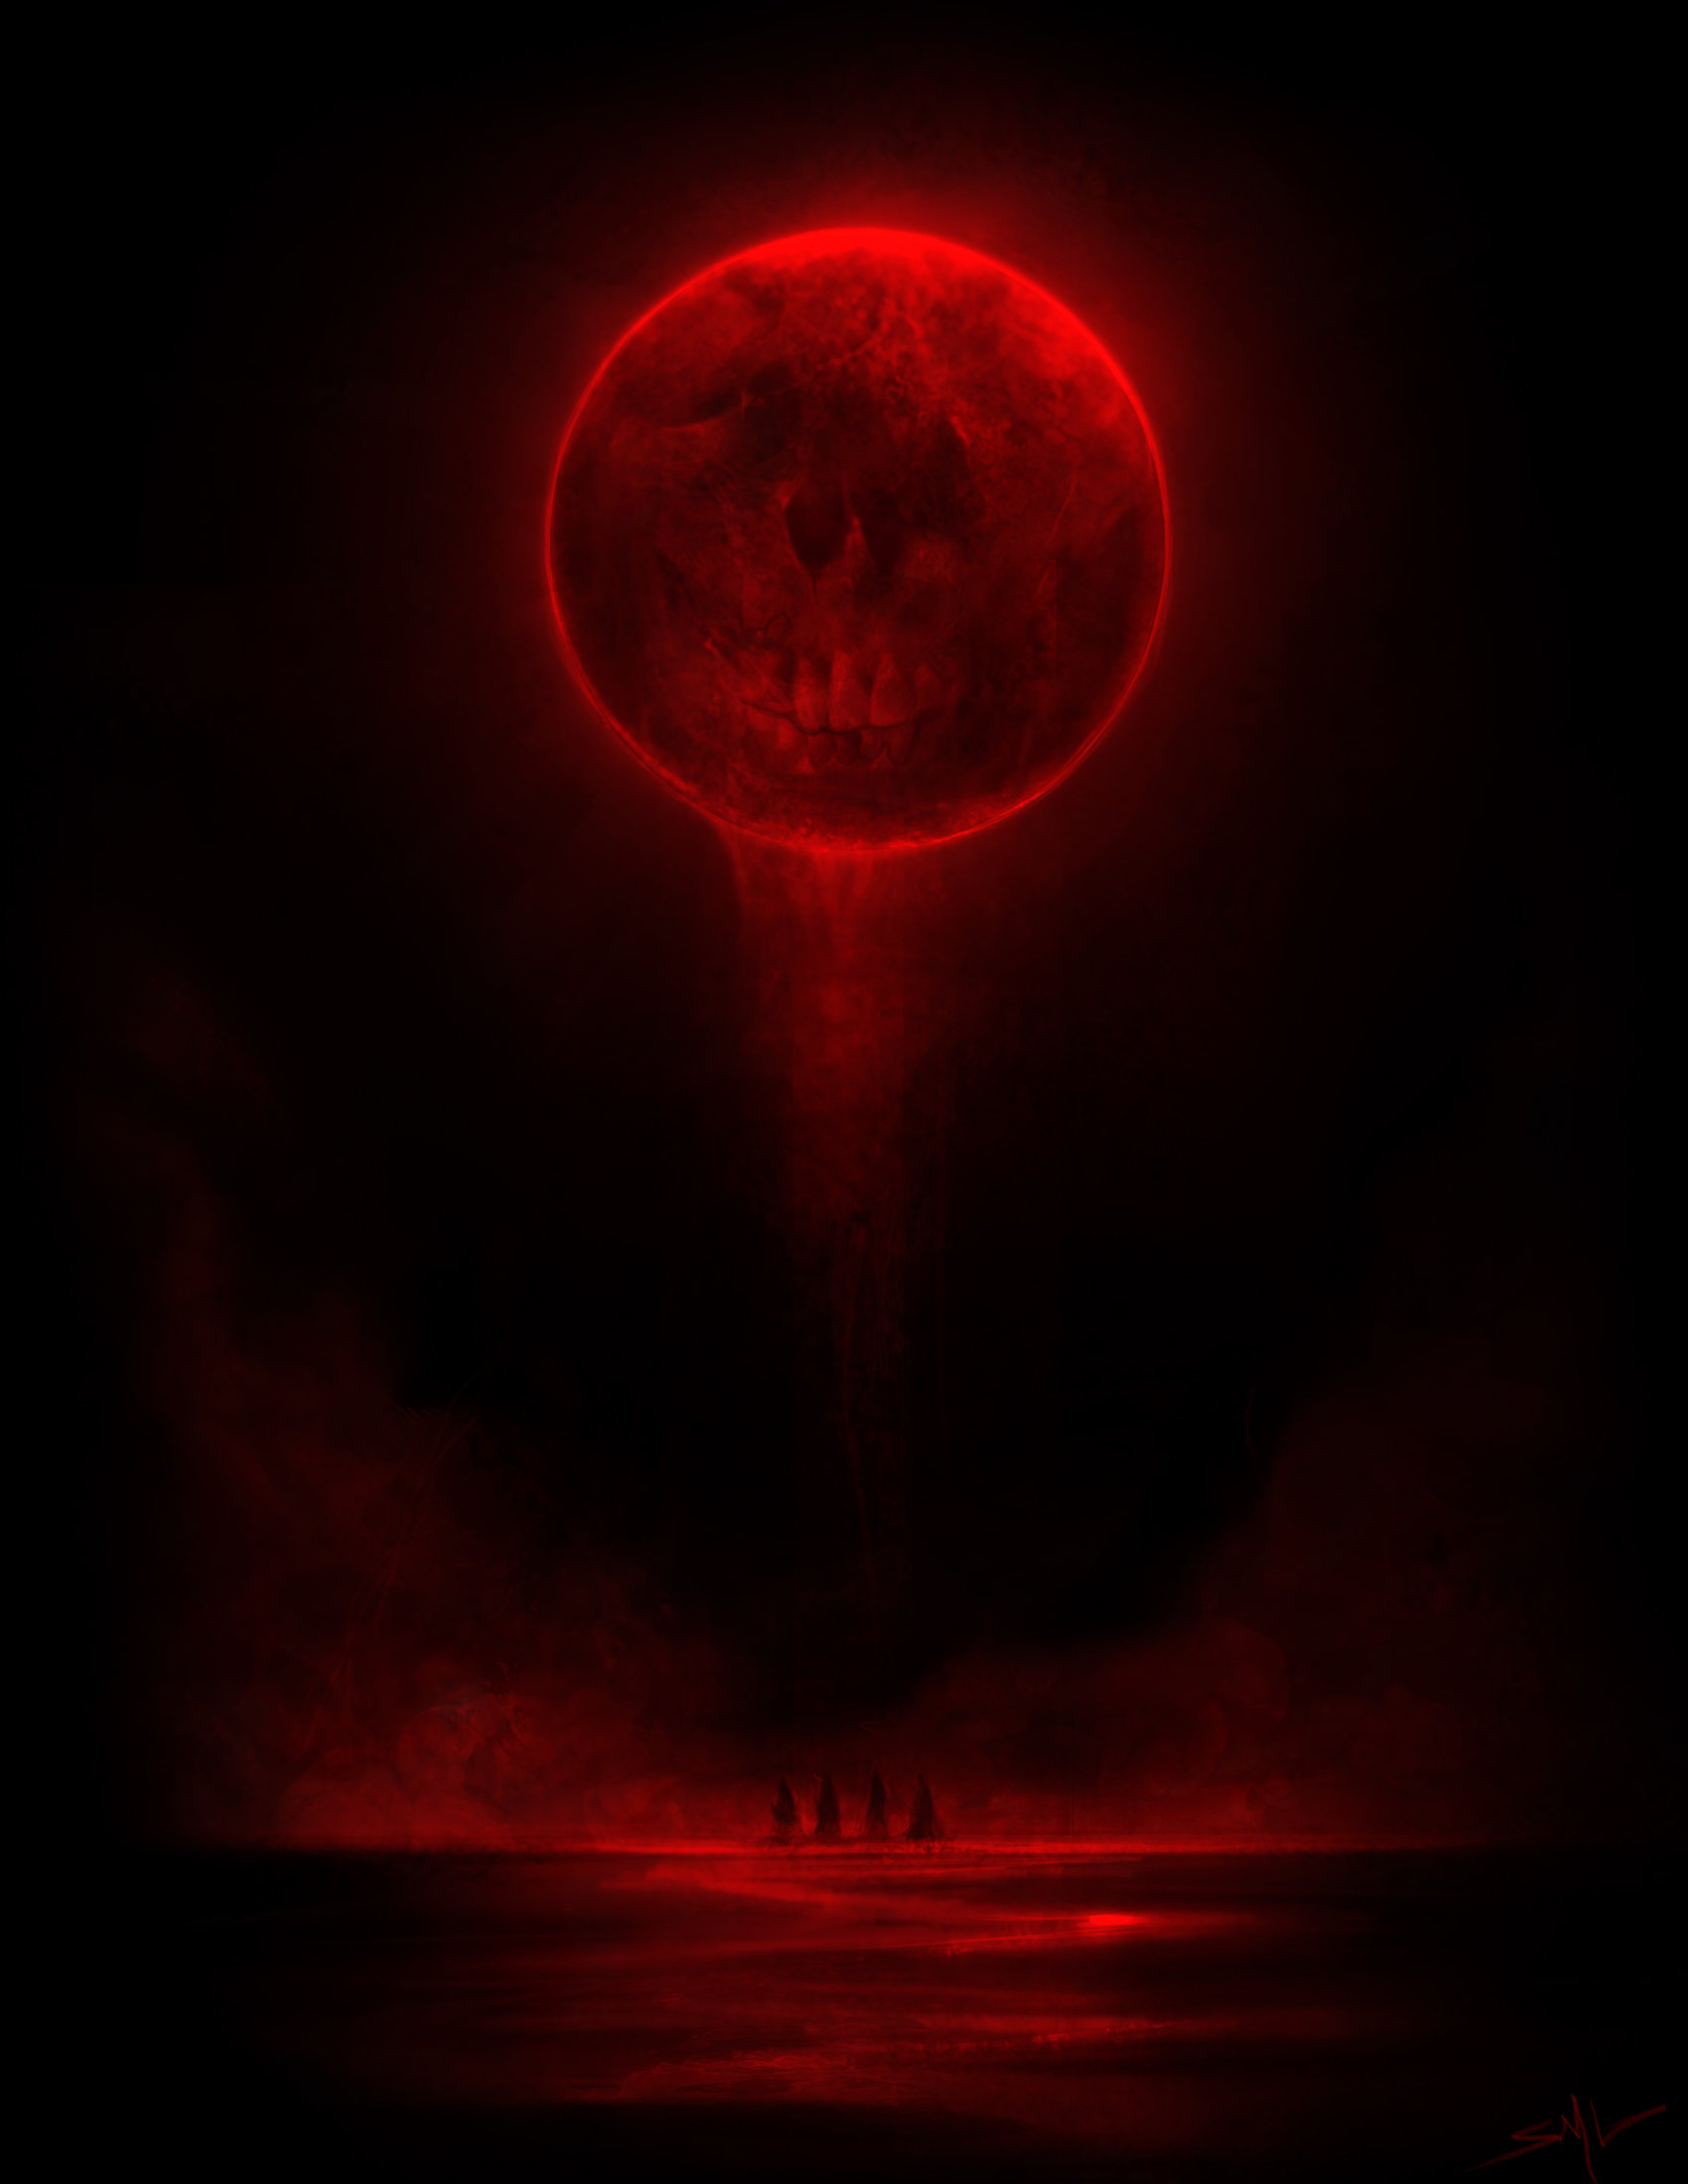 the blood moon.